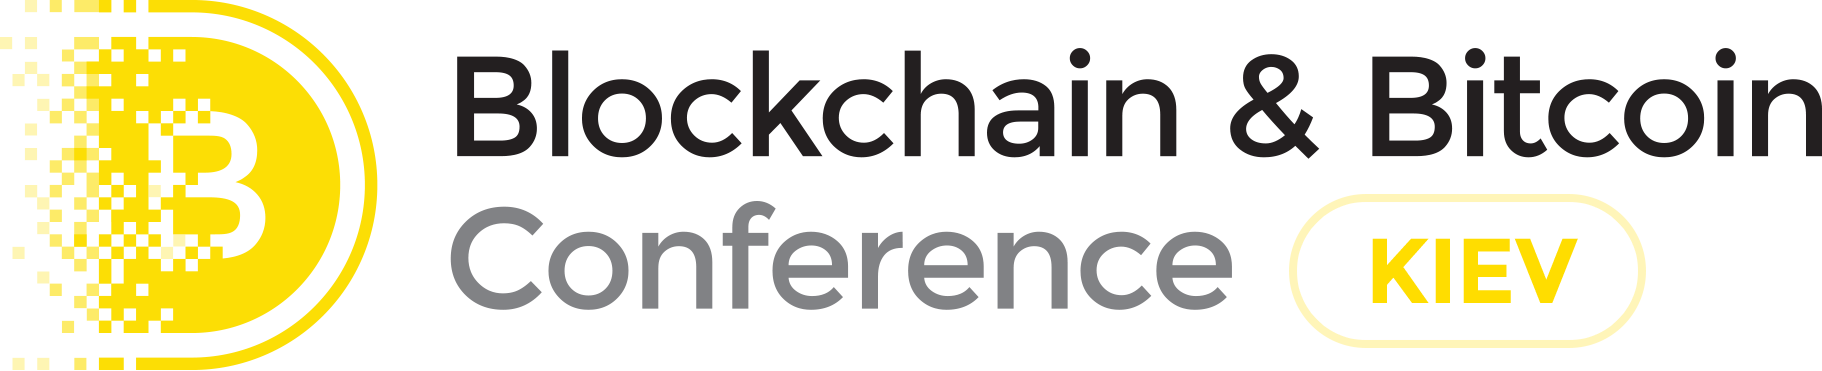 Blockchain & Bitcoin Conference Kiev 2016: Results and Impressions